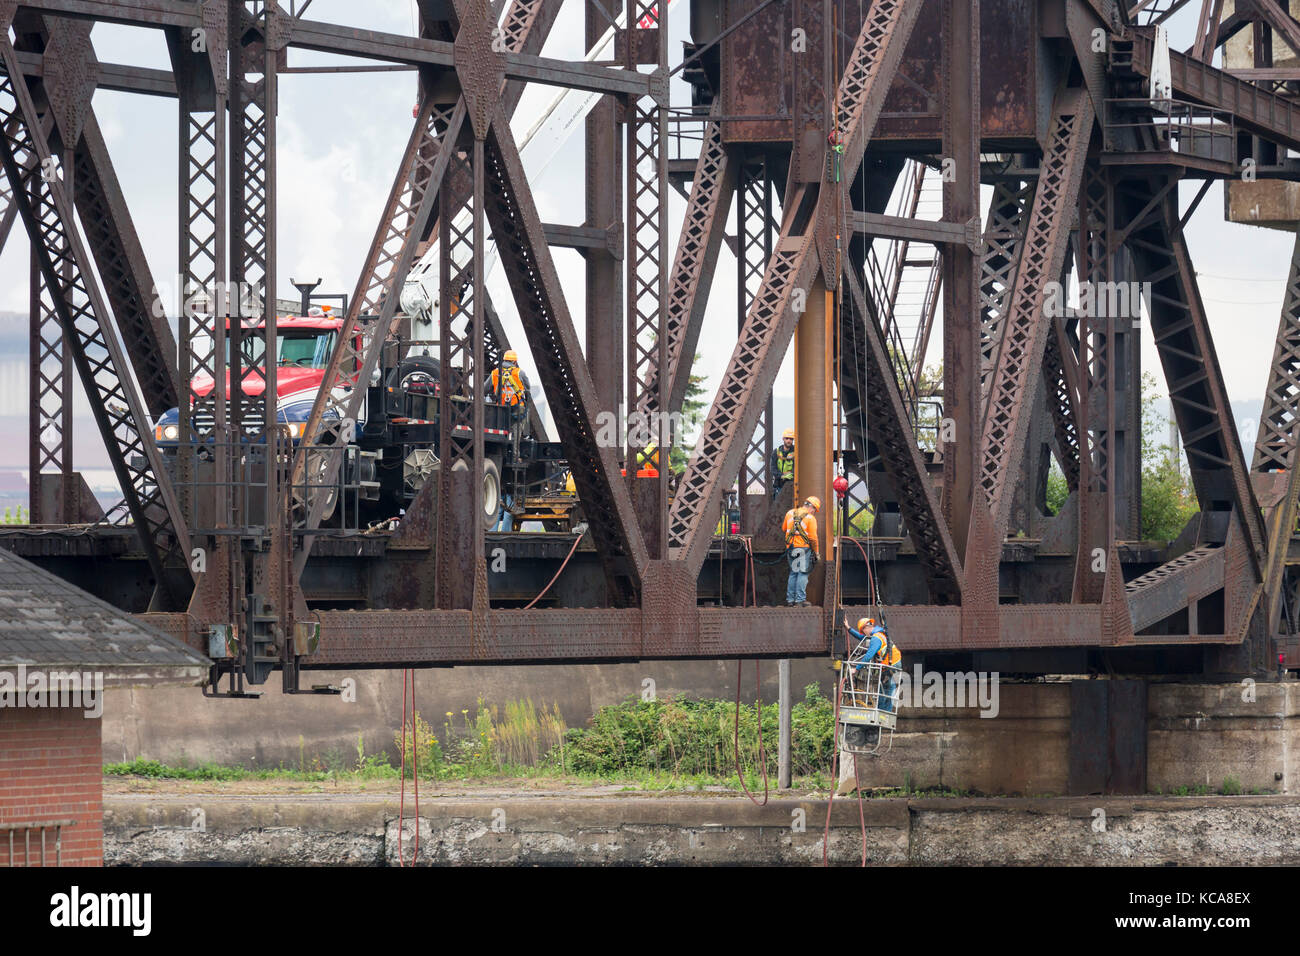 Sault Ste Marie, Michigan - Workers repair the international railroad bridge which connects Canada and Michigan above the St. Mary's River and the Soo Stock Photo